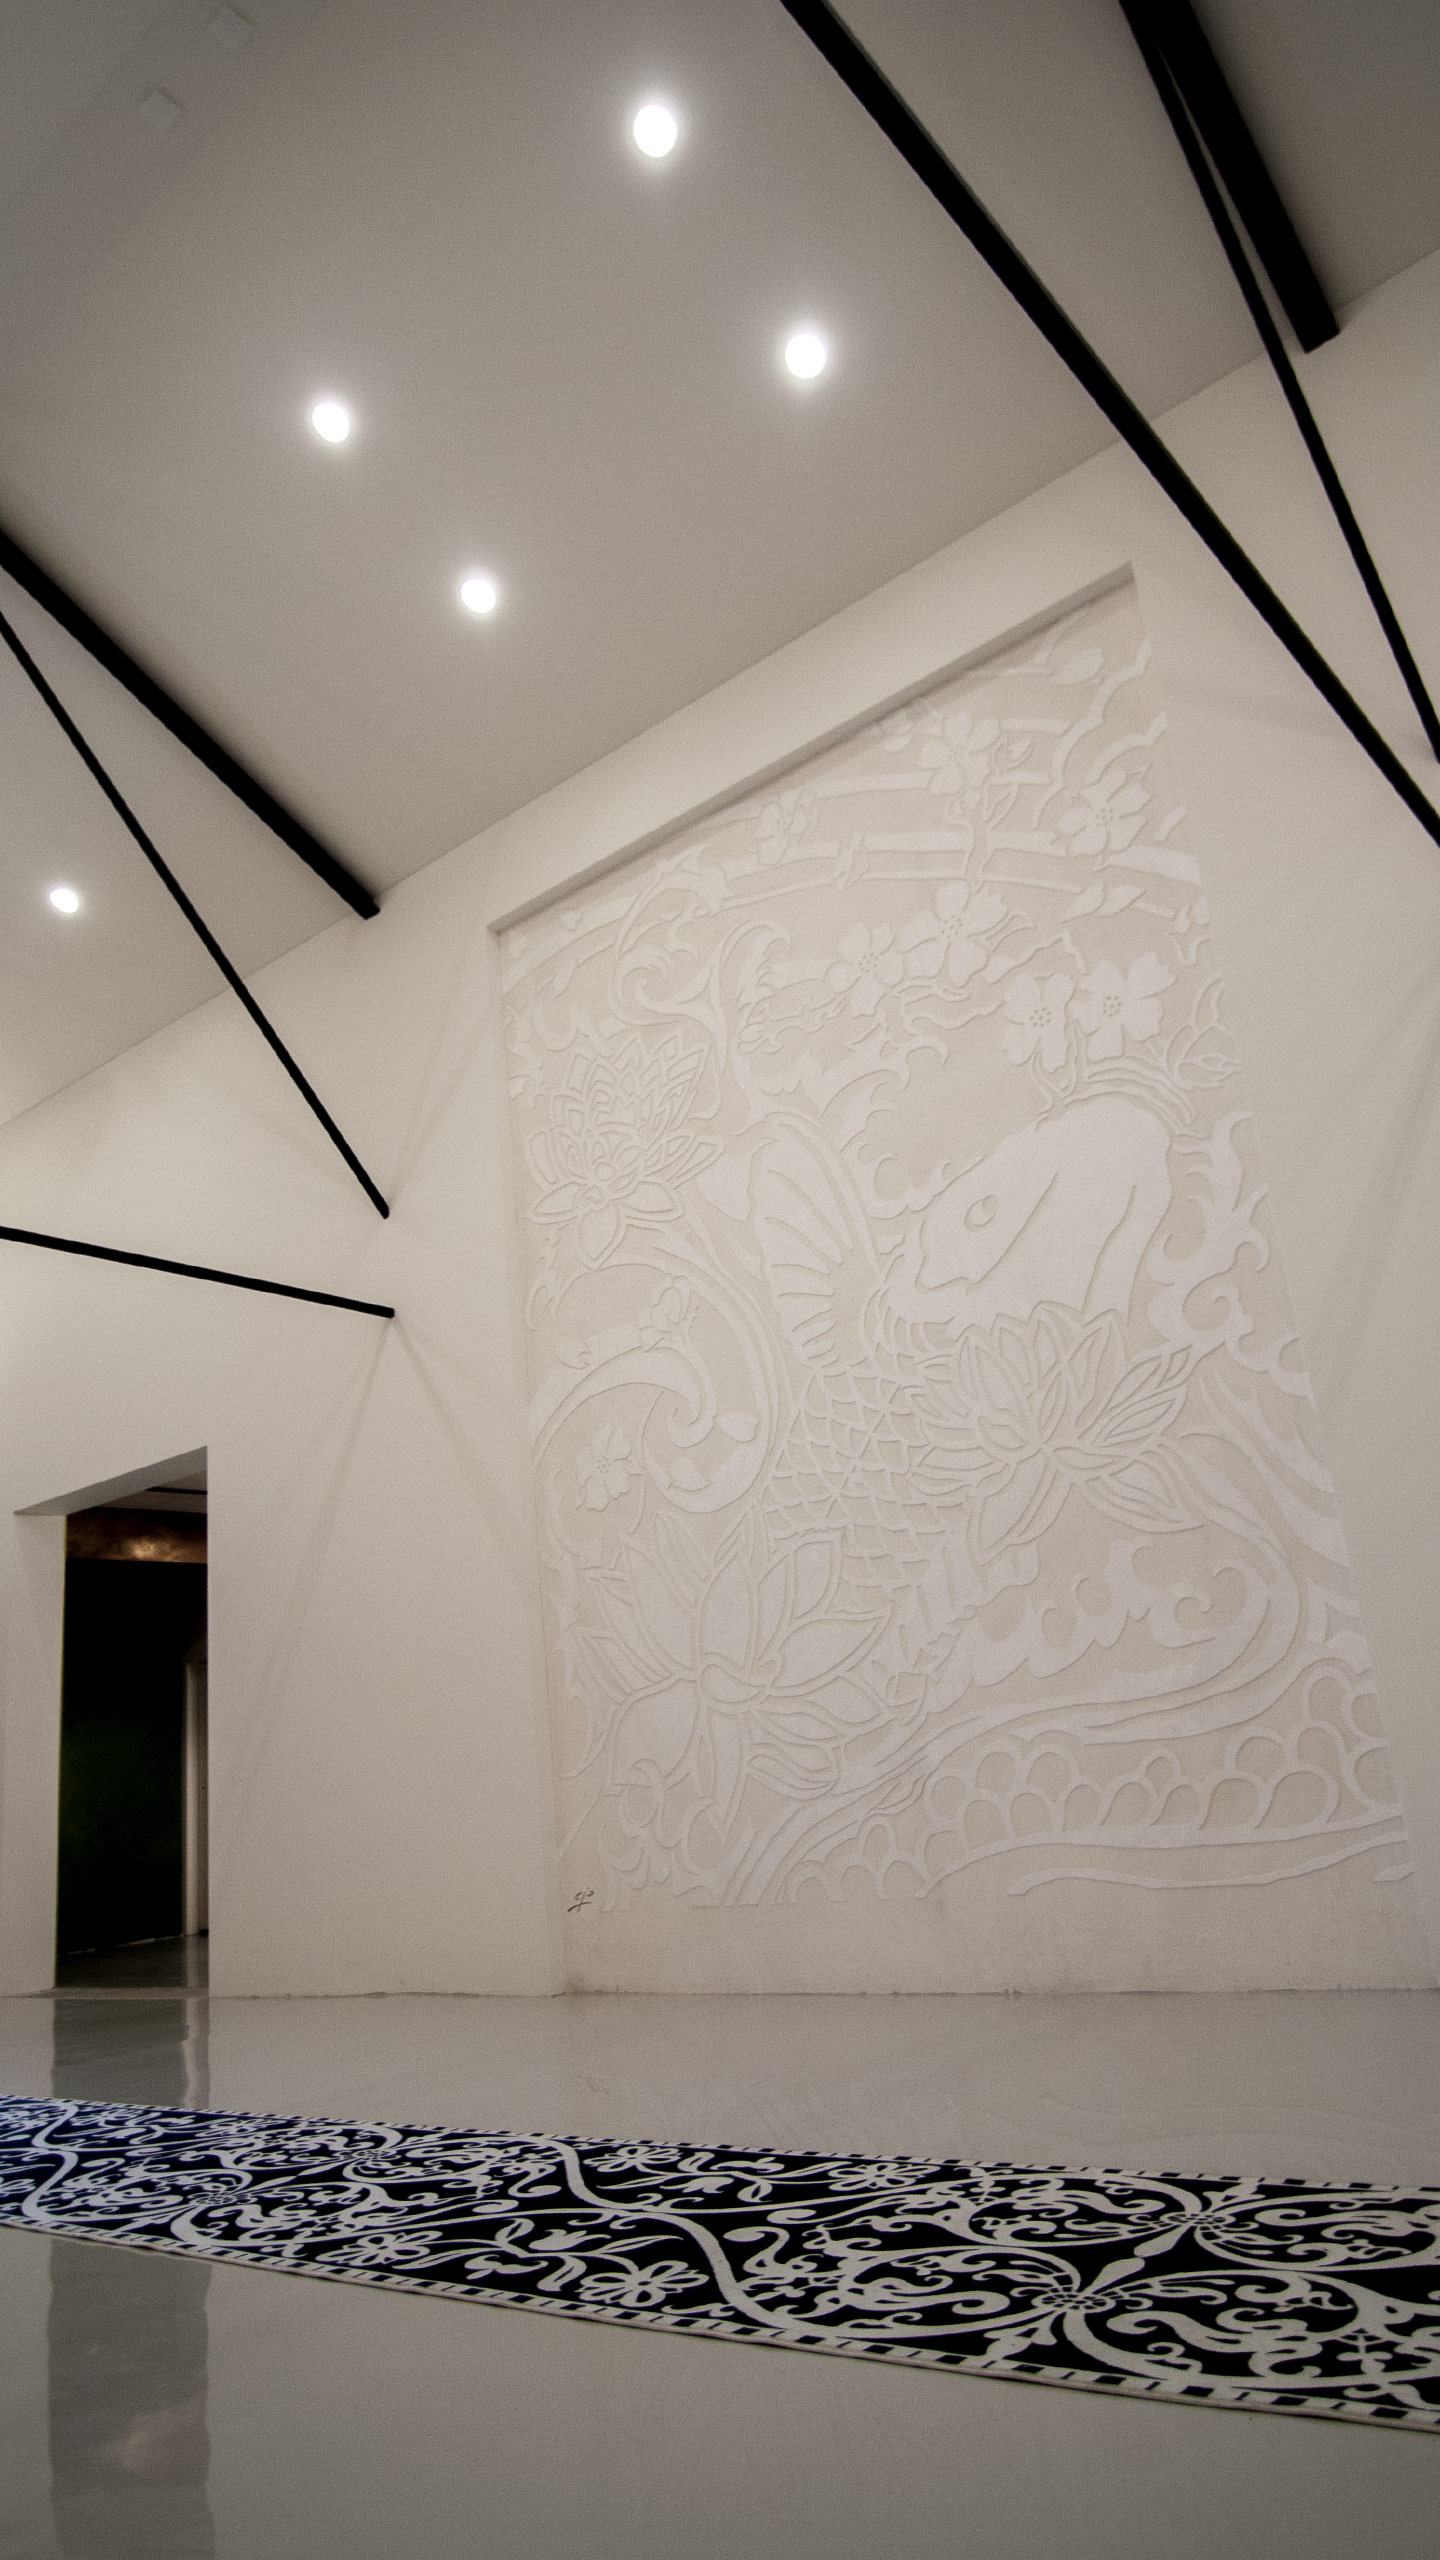 Sgraffito Stucco - Large scale Sgraffito, Koi fish and almond flowers